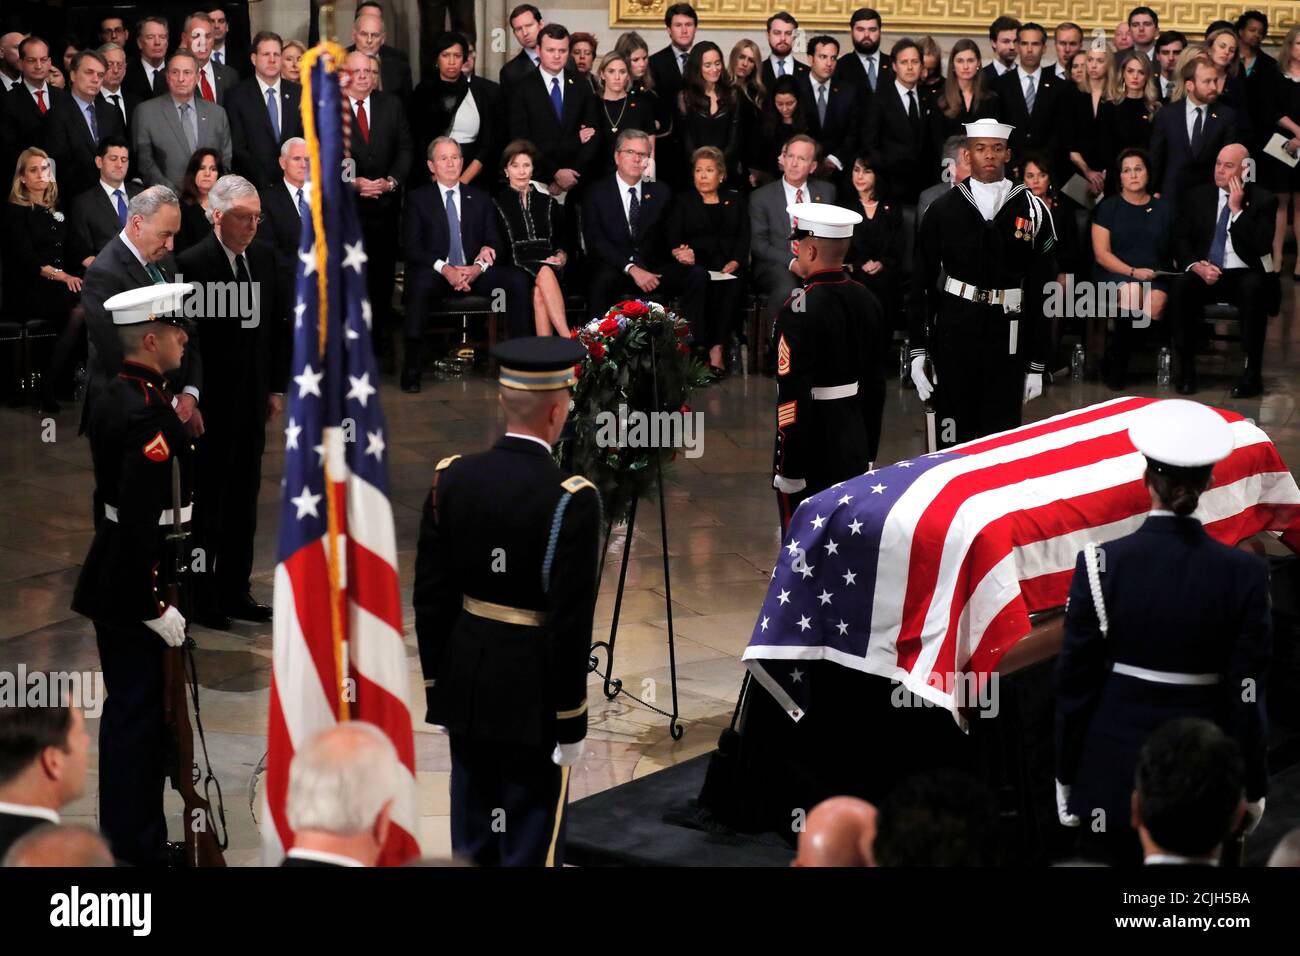 U.S. Senate majority and minority leaders Mitch McConnell (R-KY) and Chuck Schumer (D-NY) bow their heads during ceremonies for the late former U.S. President George H.W. Bush inside the U.S. Capitol rotunda in Washington D.C., U.S., December 3, 2018. REUTERS/Eric Thayer Stock Photo